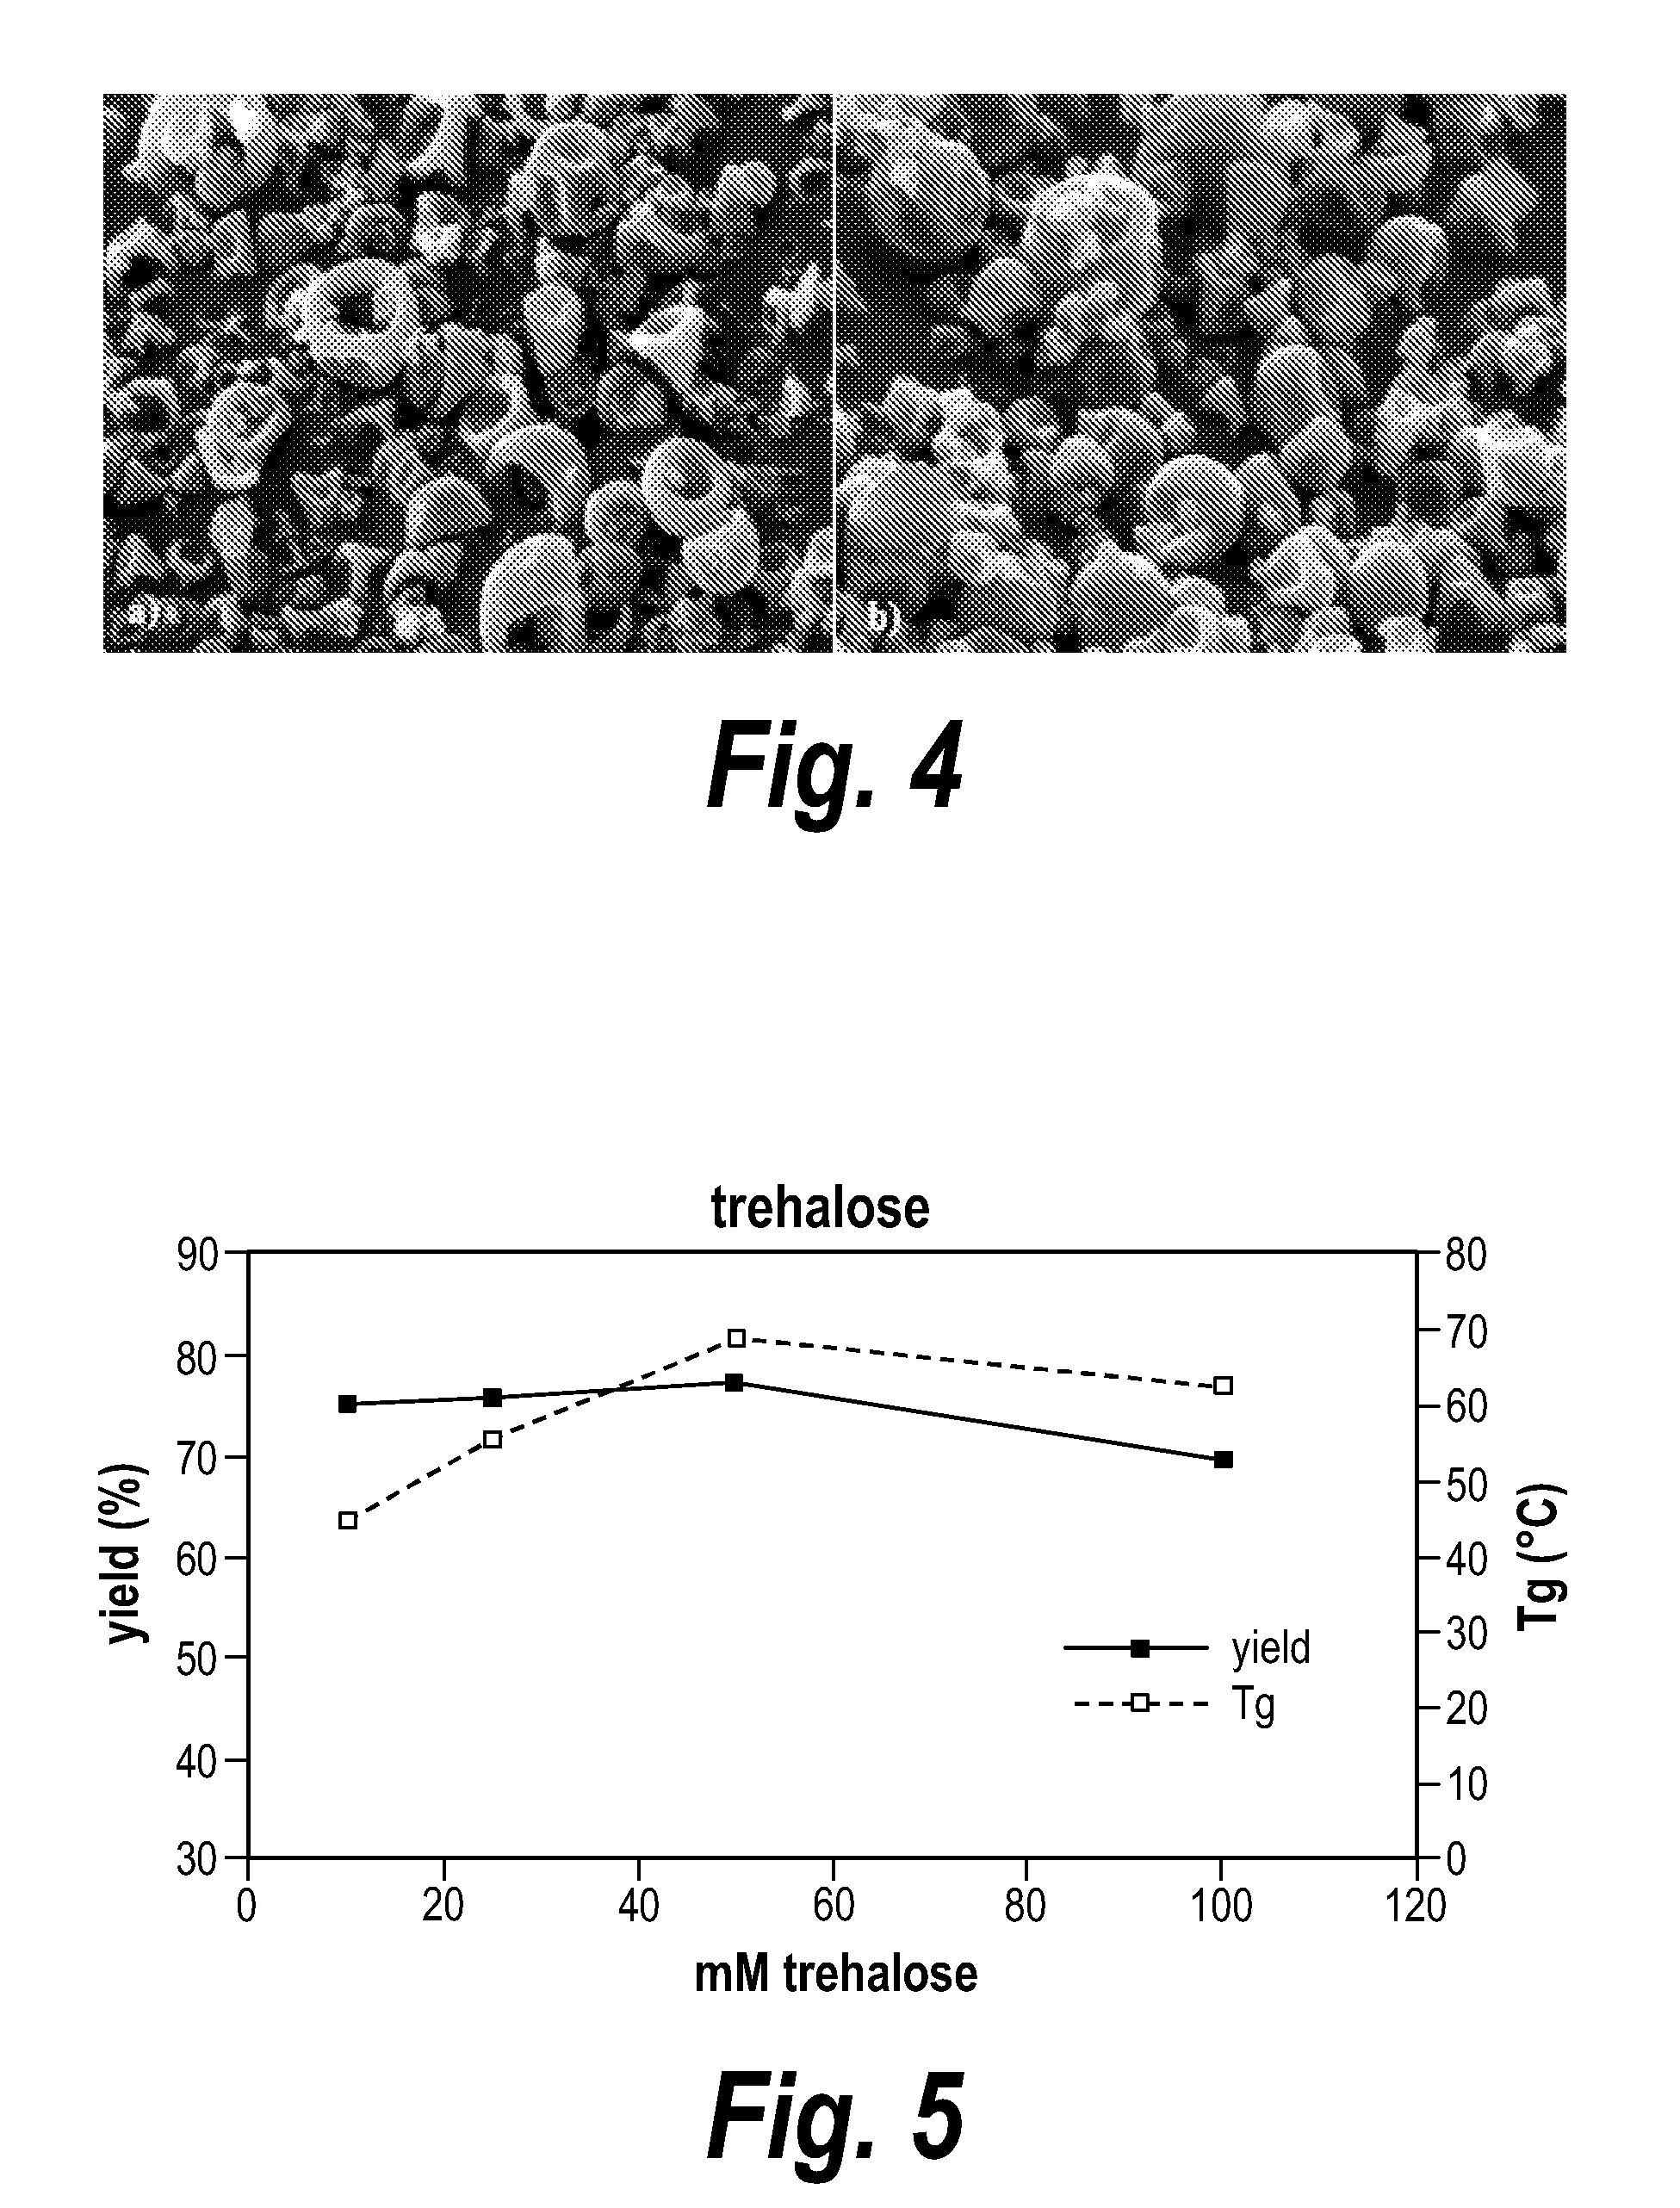 Powdered protein compositions and methods of making same